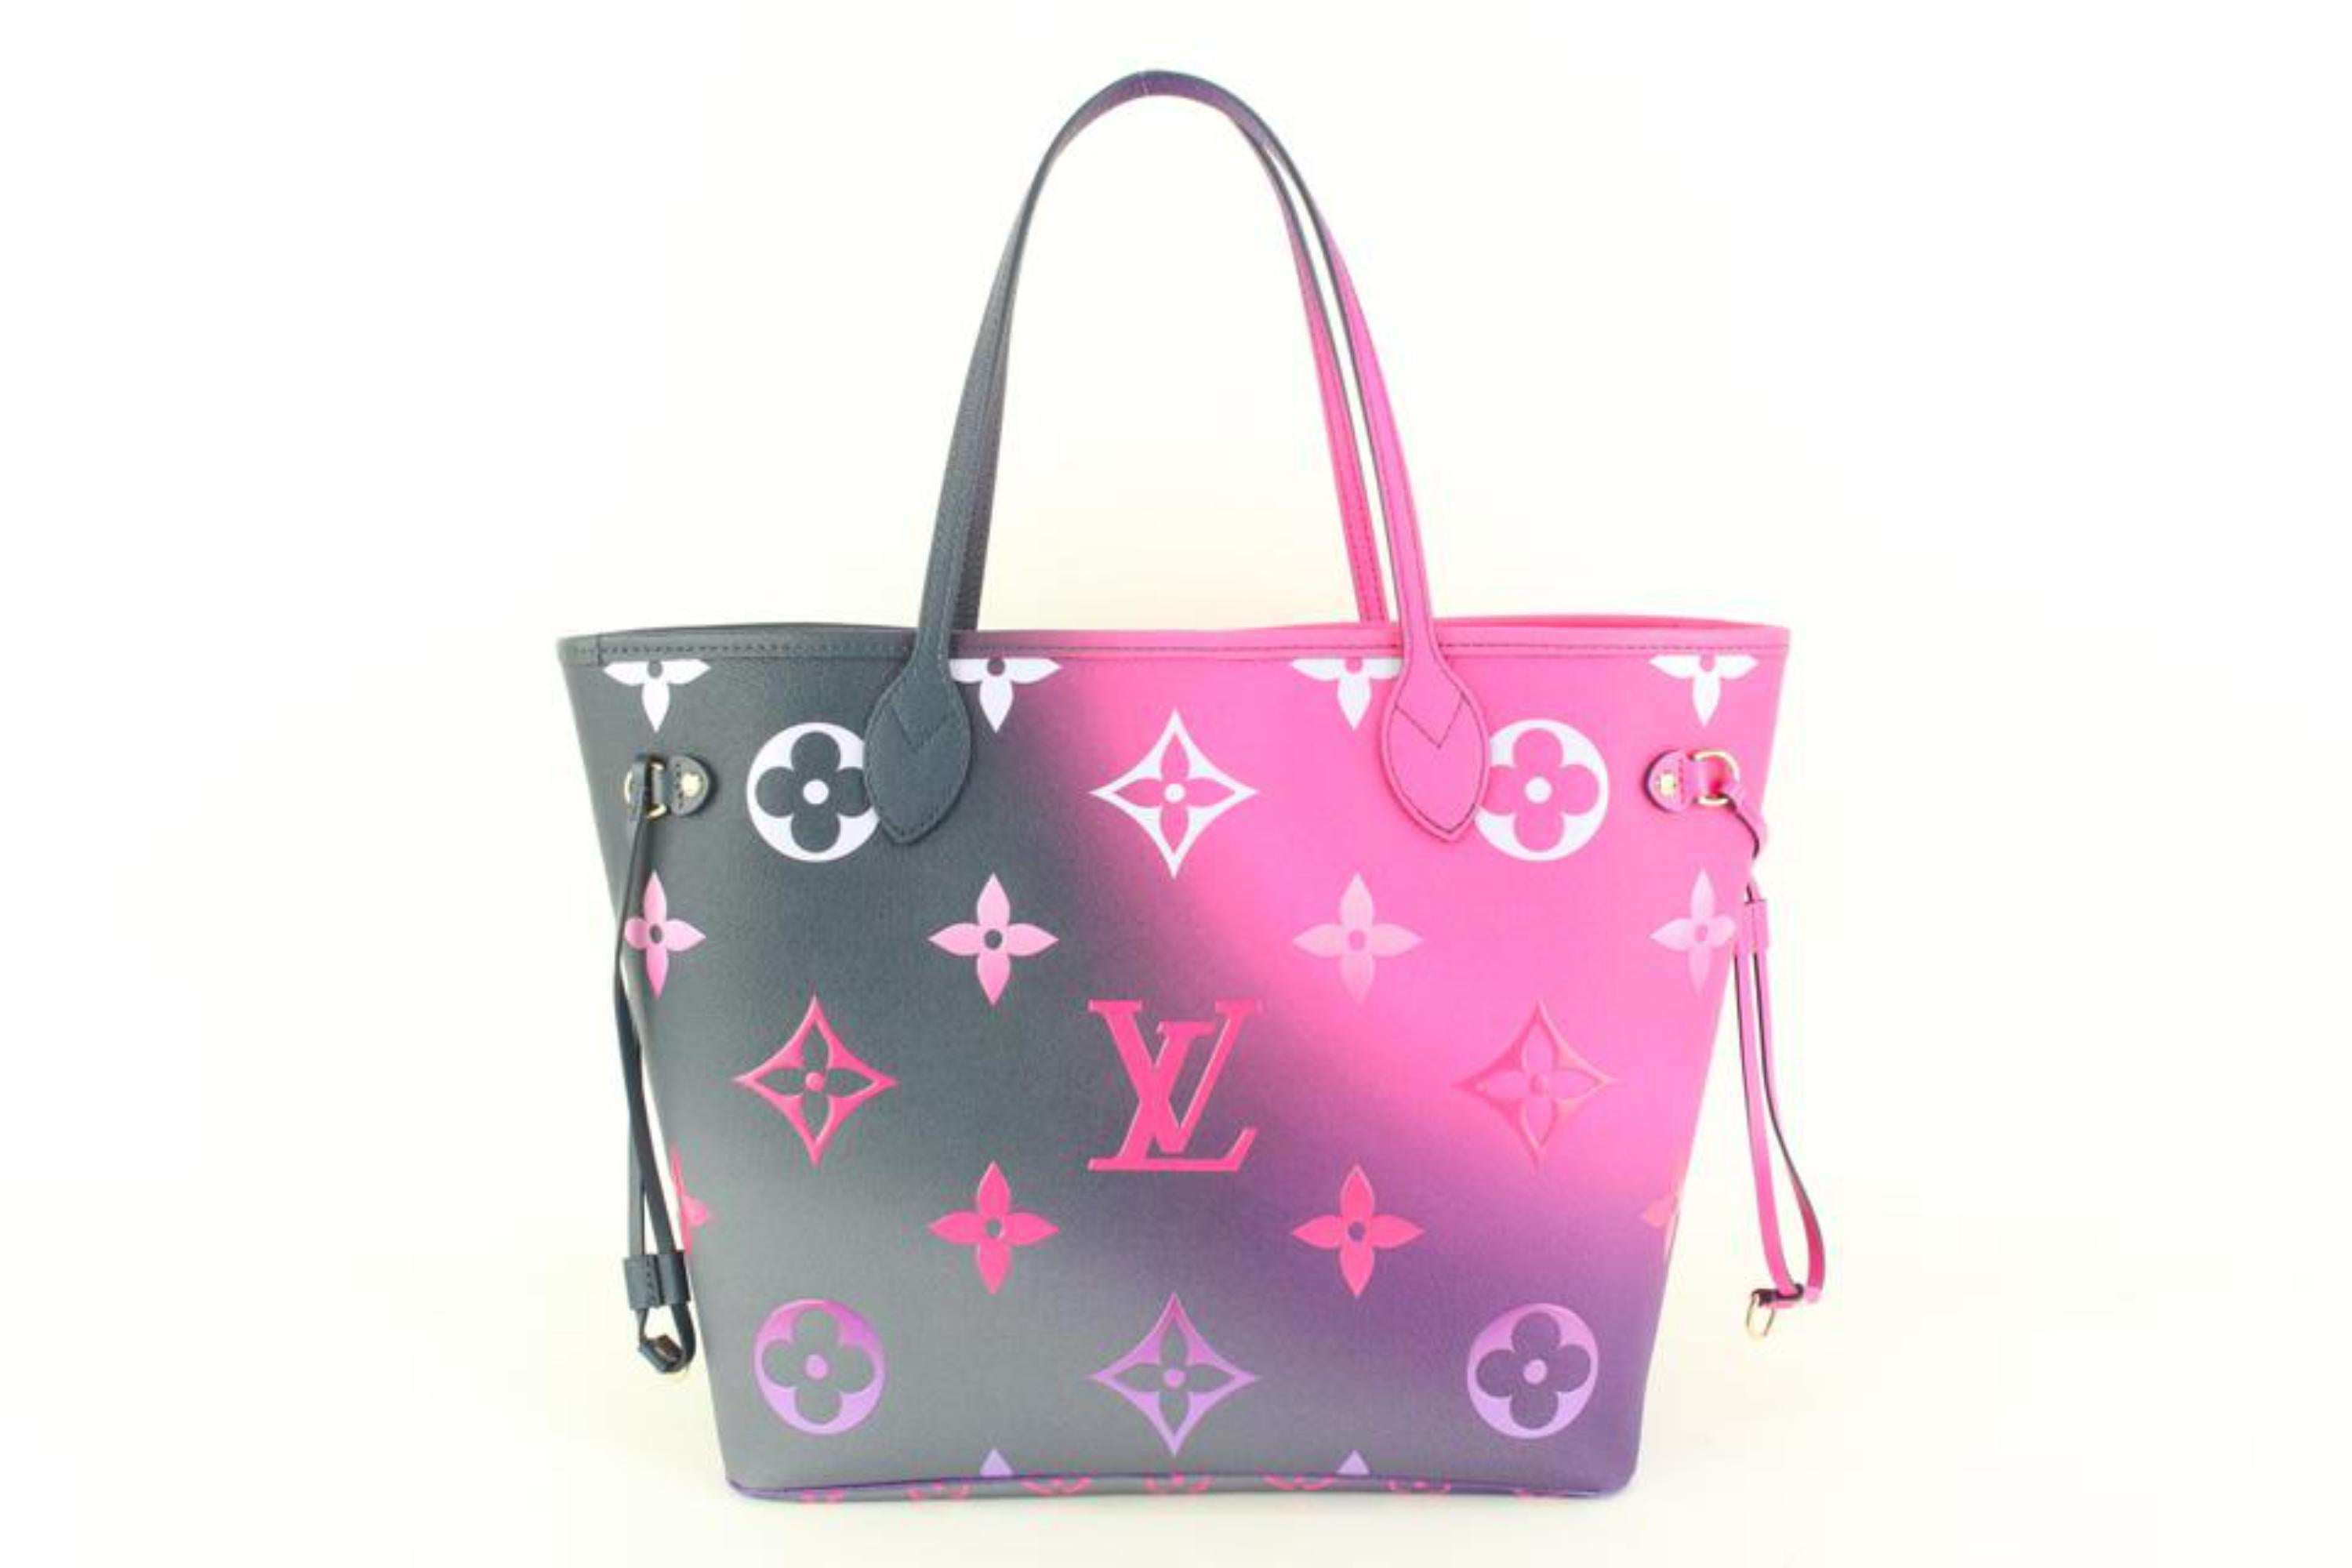 Louis Vuitton Monogram Midnight Fuchsia Neverfull MM Tote Bag with Pouch 62lv511 1